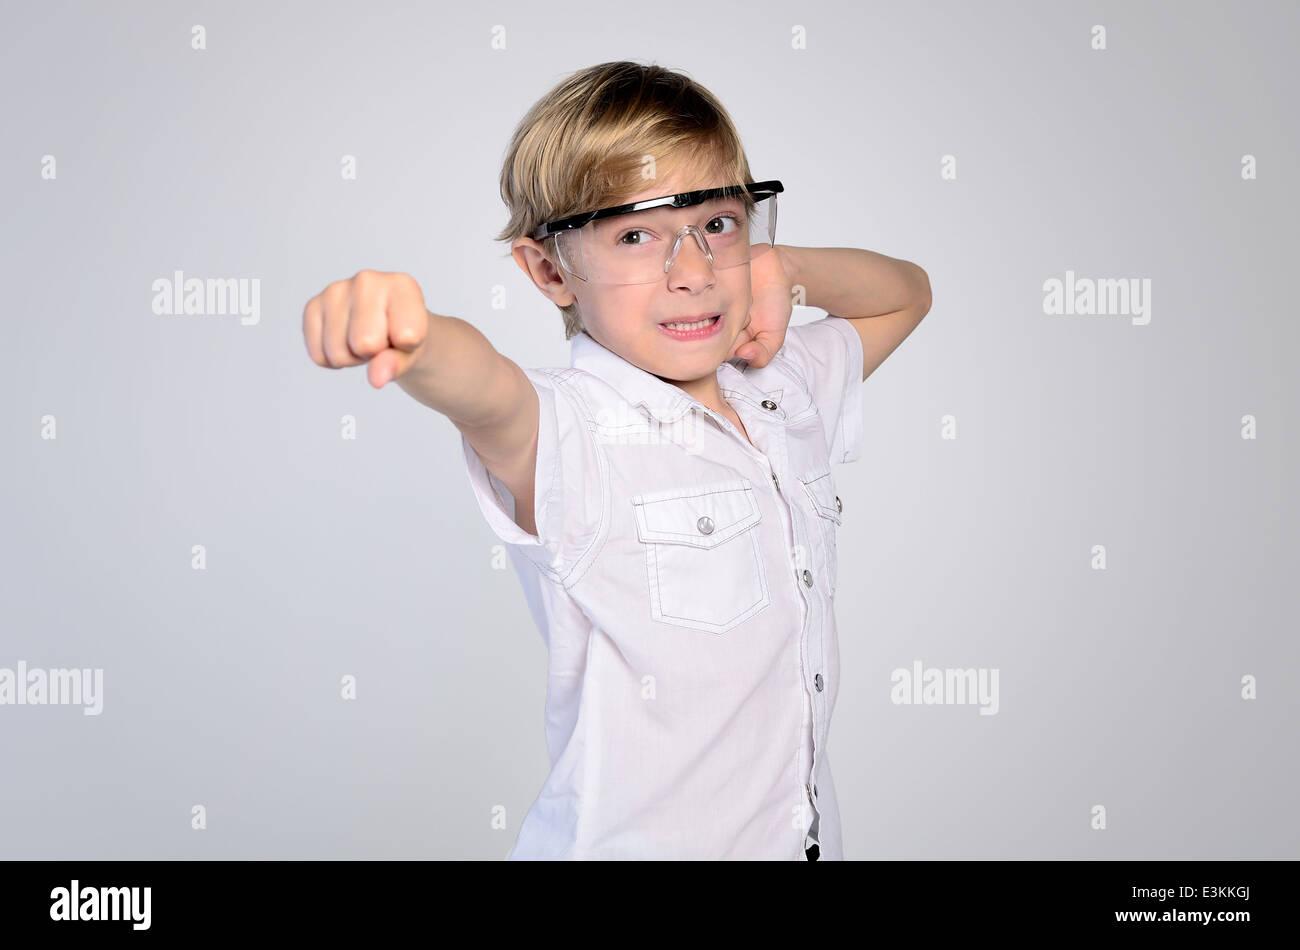 aspirations attitude beautiful boy champion cheerful child childhood competition concept confidence cute decision education ener Stock Photo